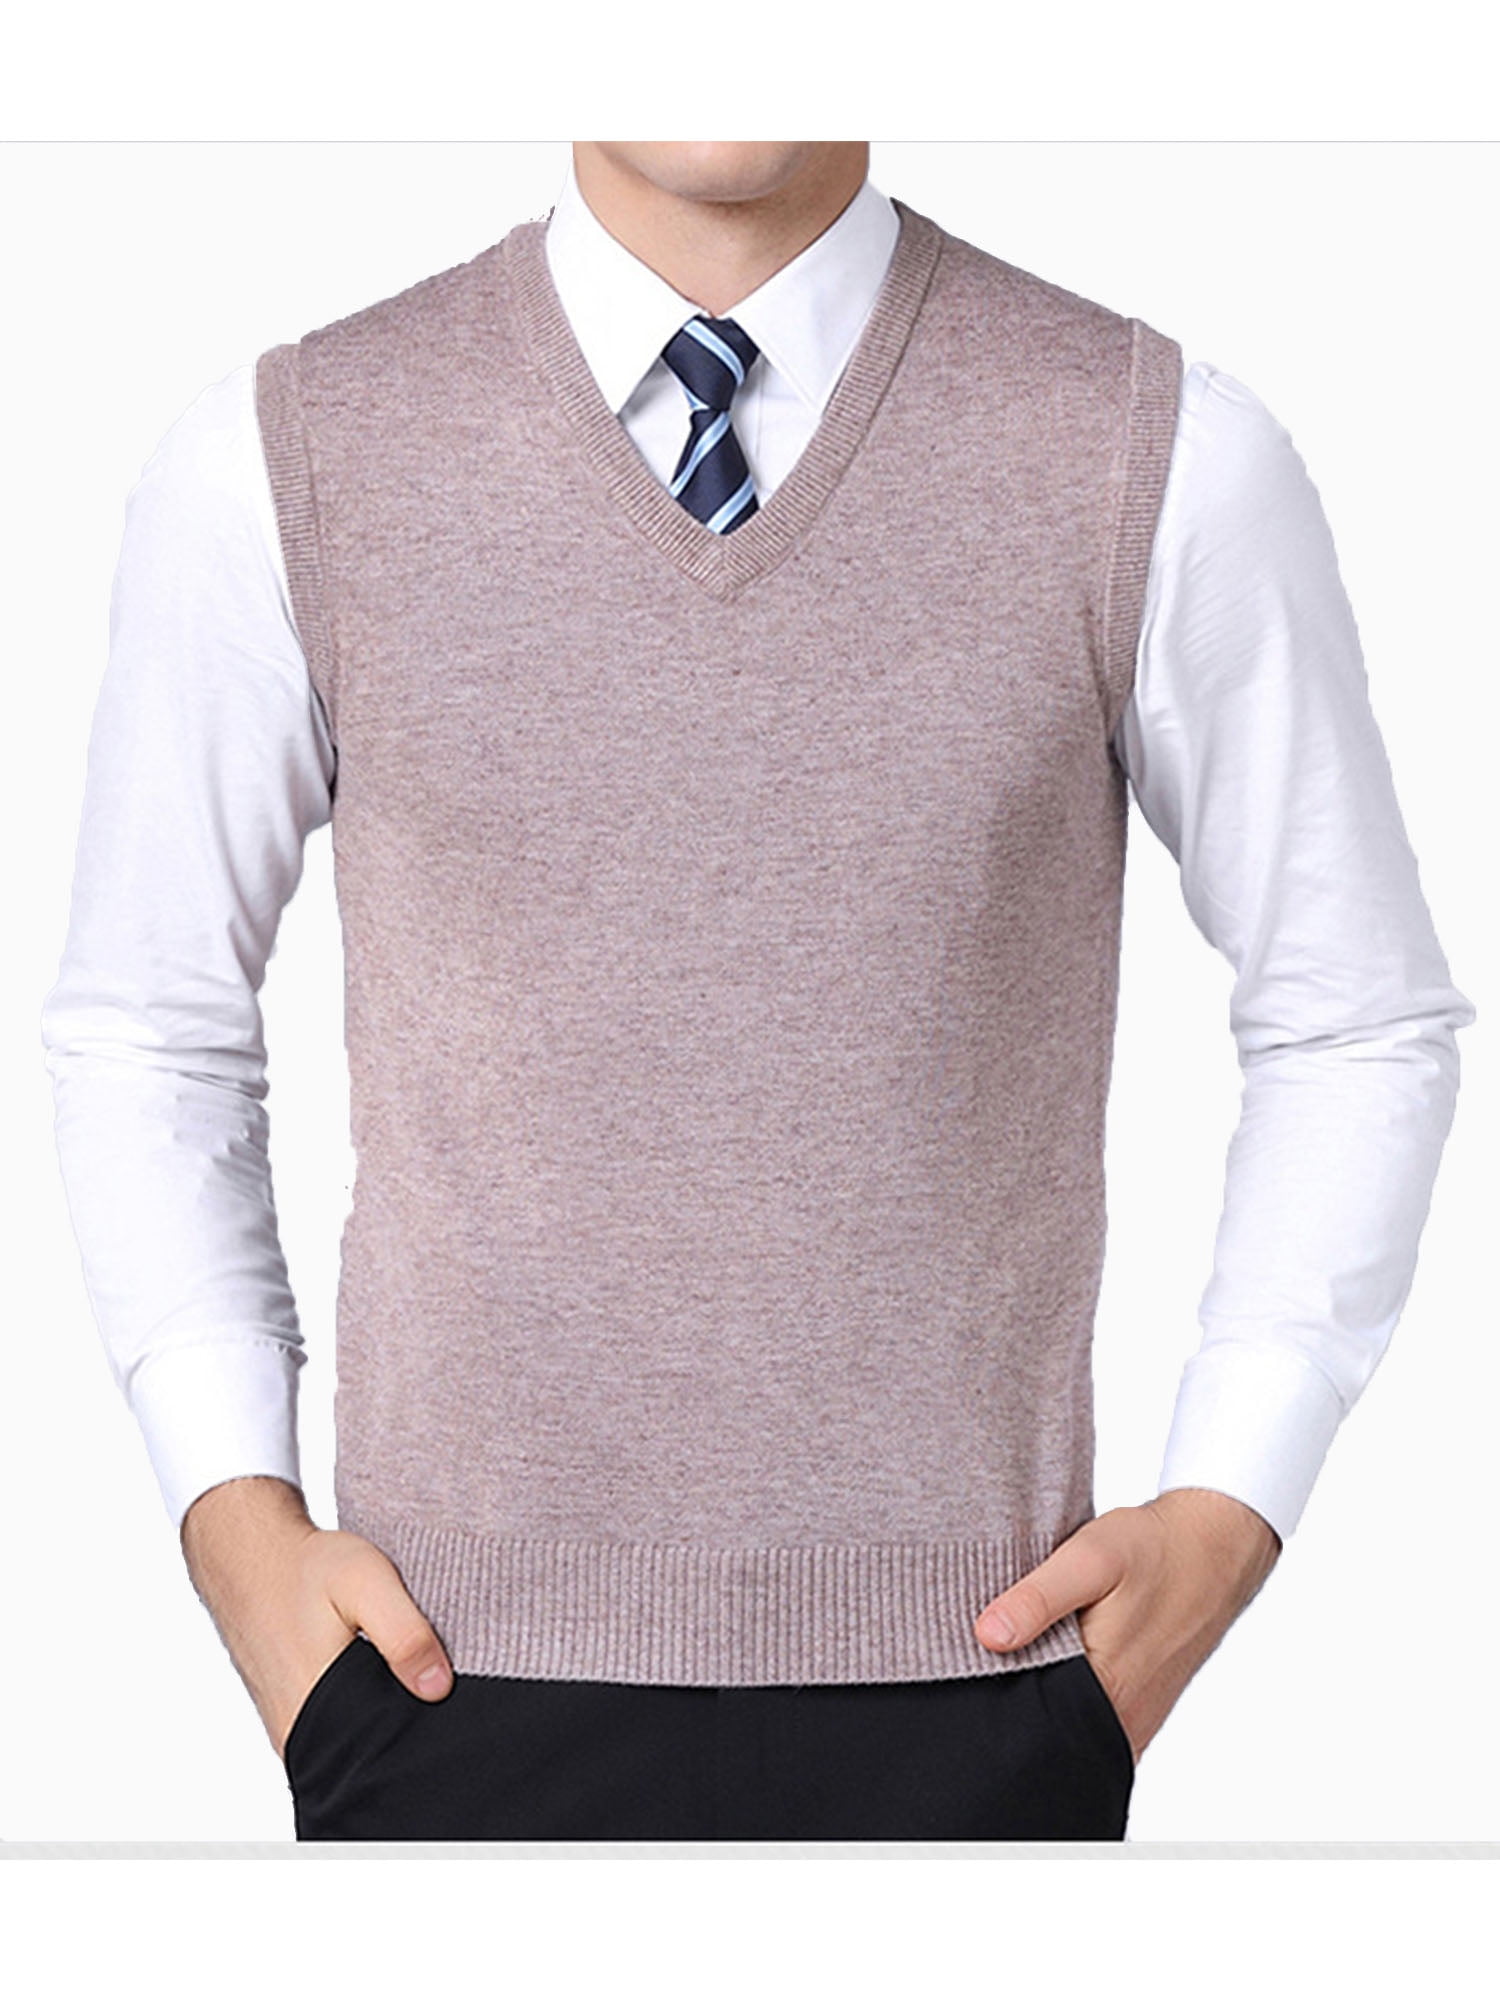 Men Knitted Waistcoat Sleeveless Knitwear Cardigan Full Button Sweater Solid Color Classic Style Business Gentleman 